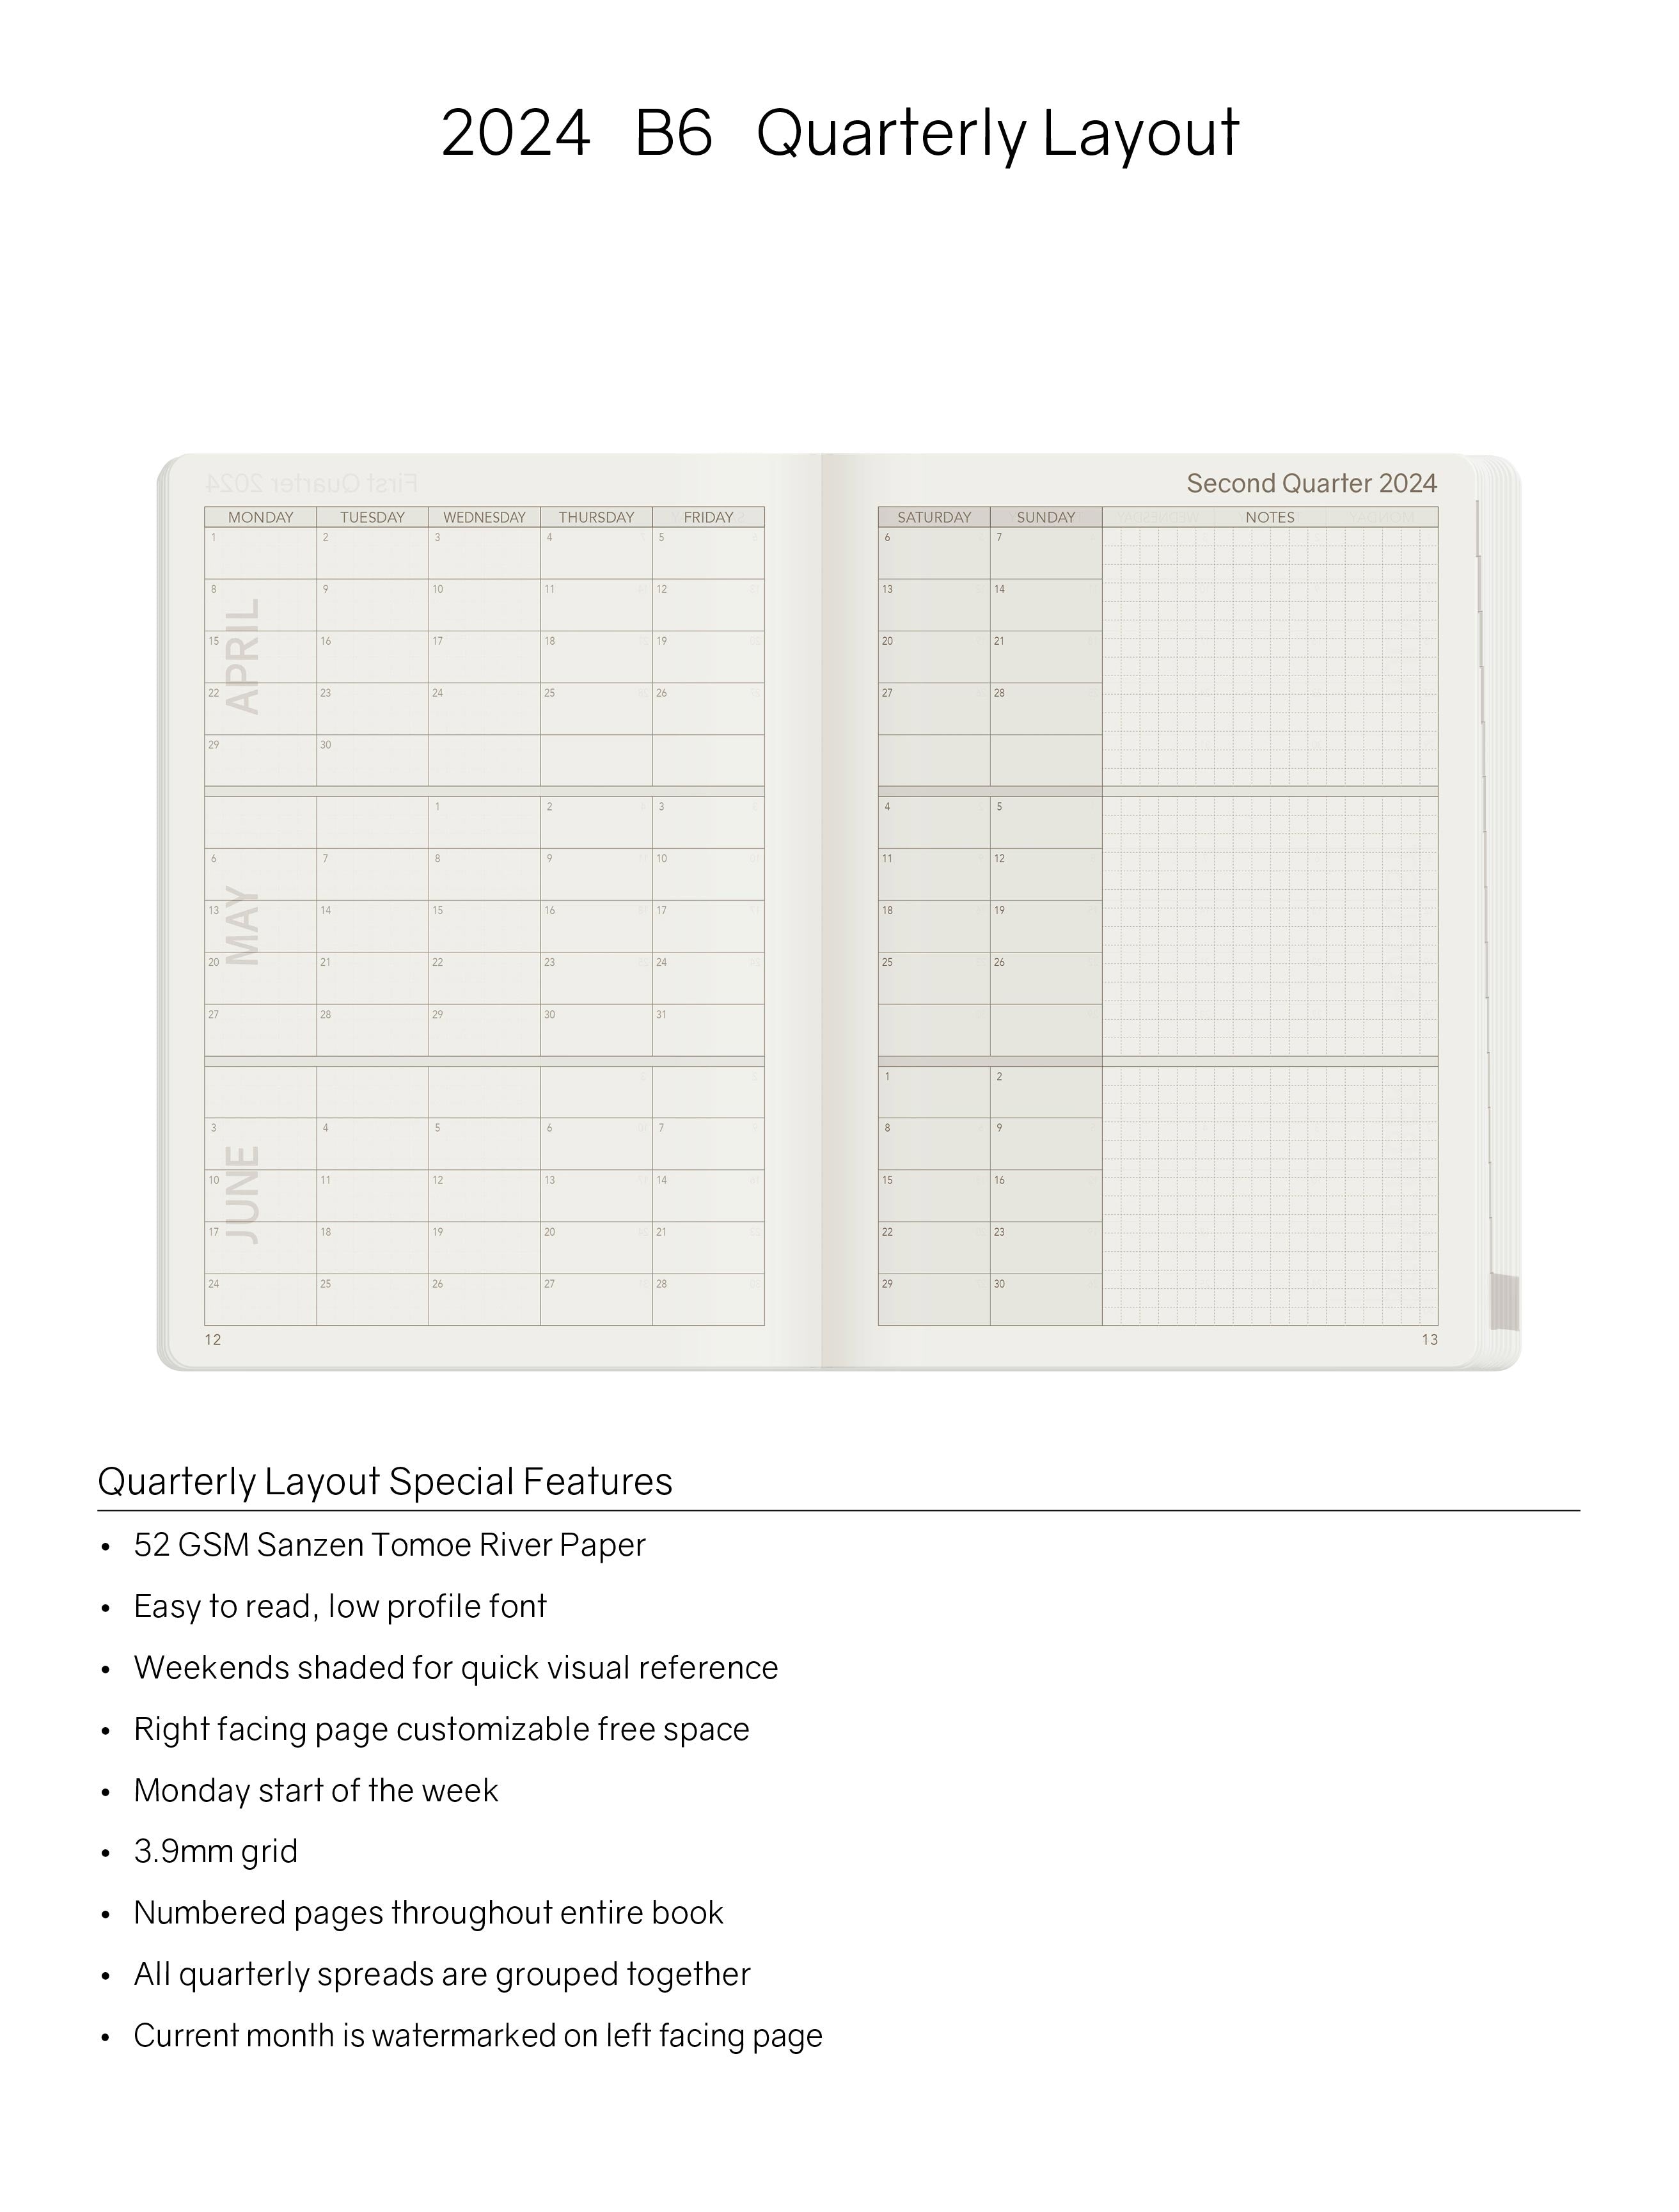 2024 B6 Weekly Planner -Wild Berry (Bordeaux) - 52gsm Tomoe River Paper (All in One)